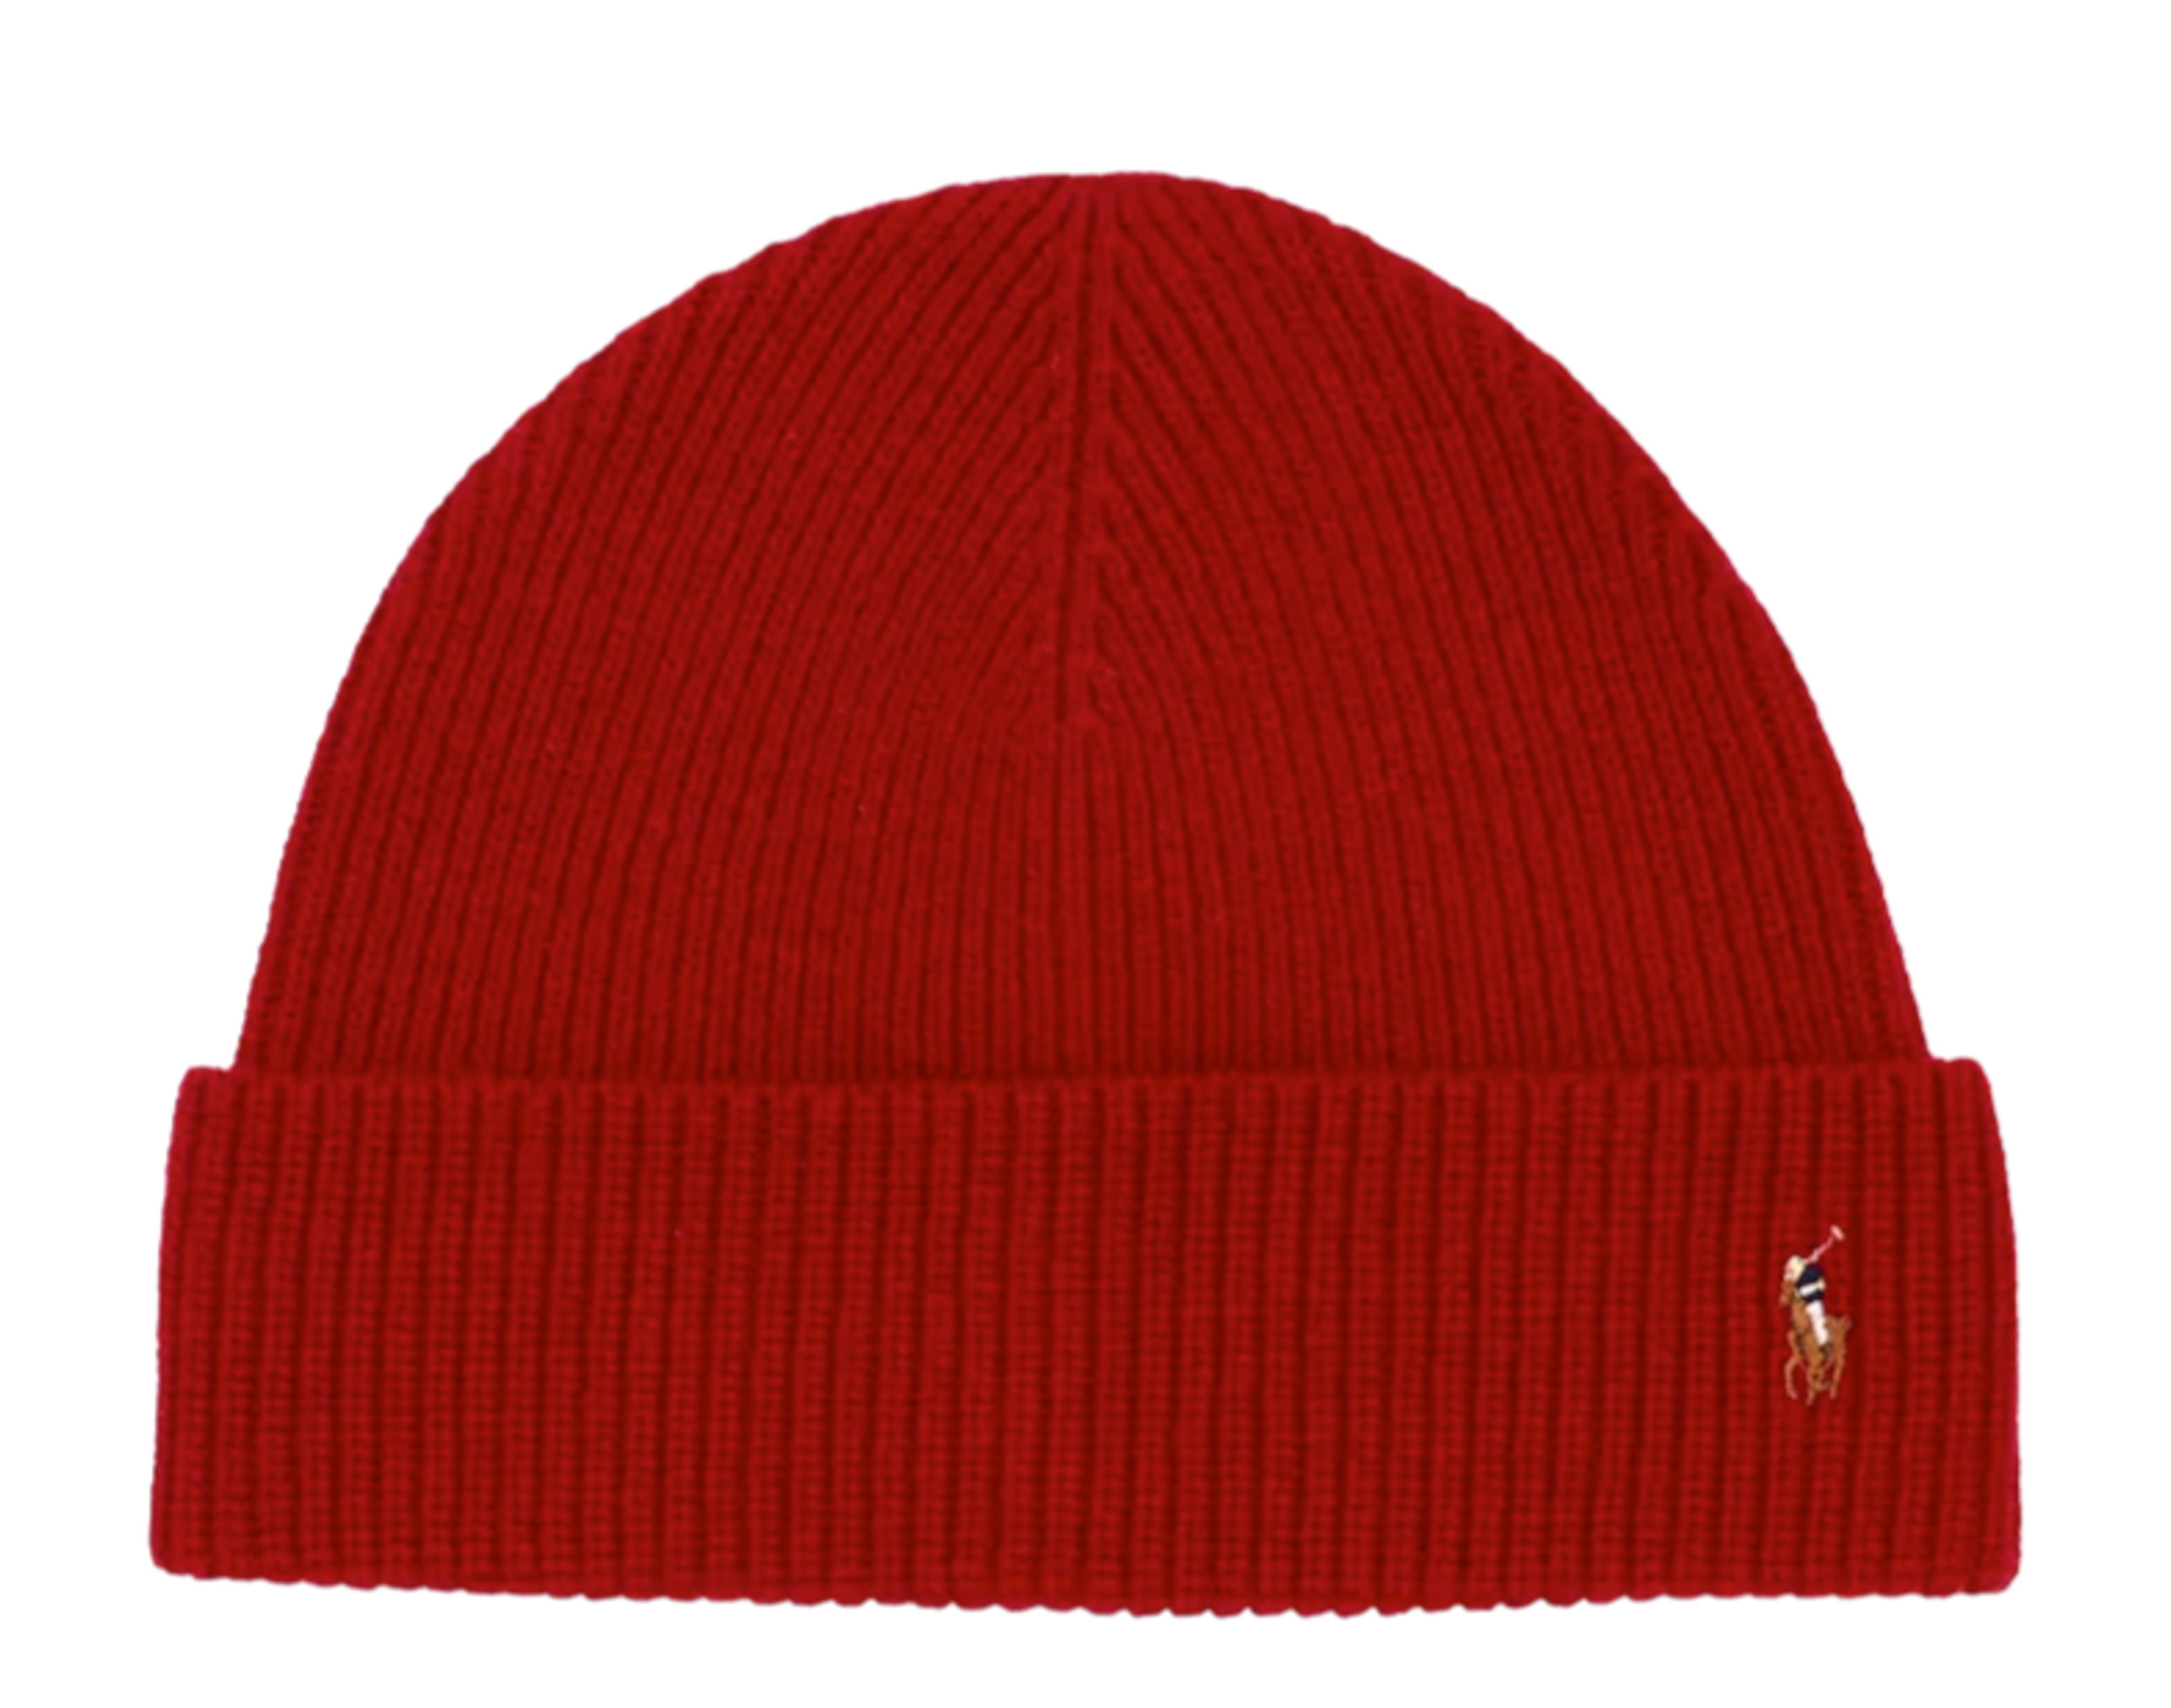 Polo Ralph Lauren Signature Cuff Knit Hat OS - image 1 of 3